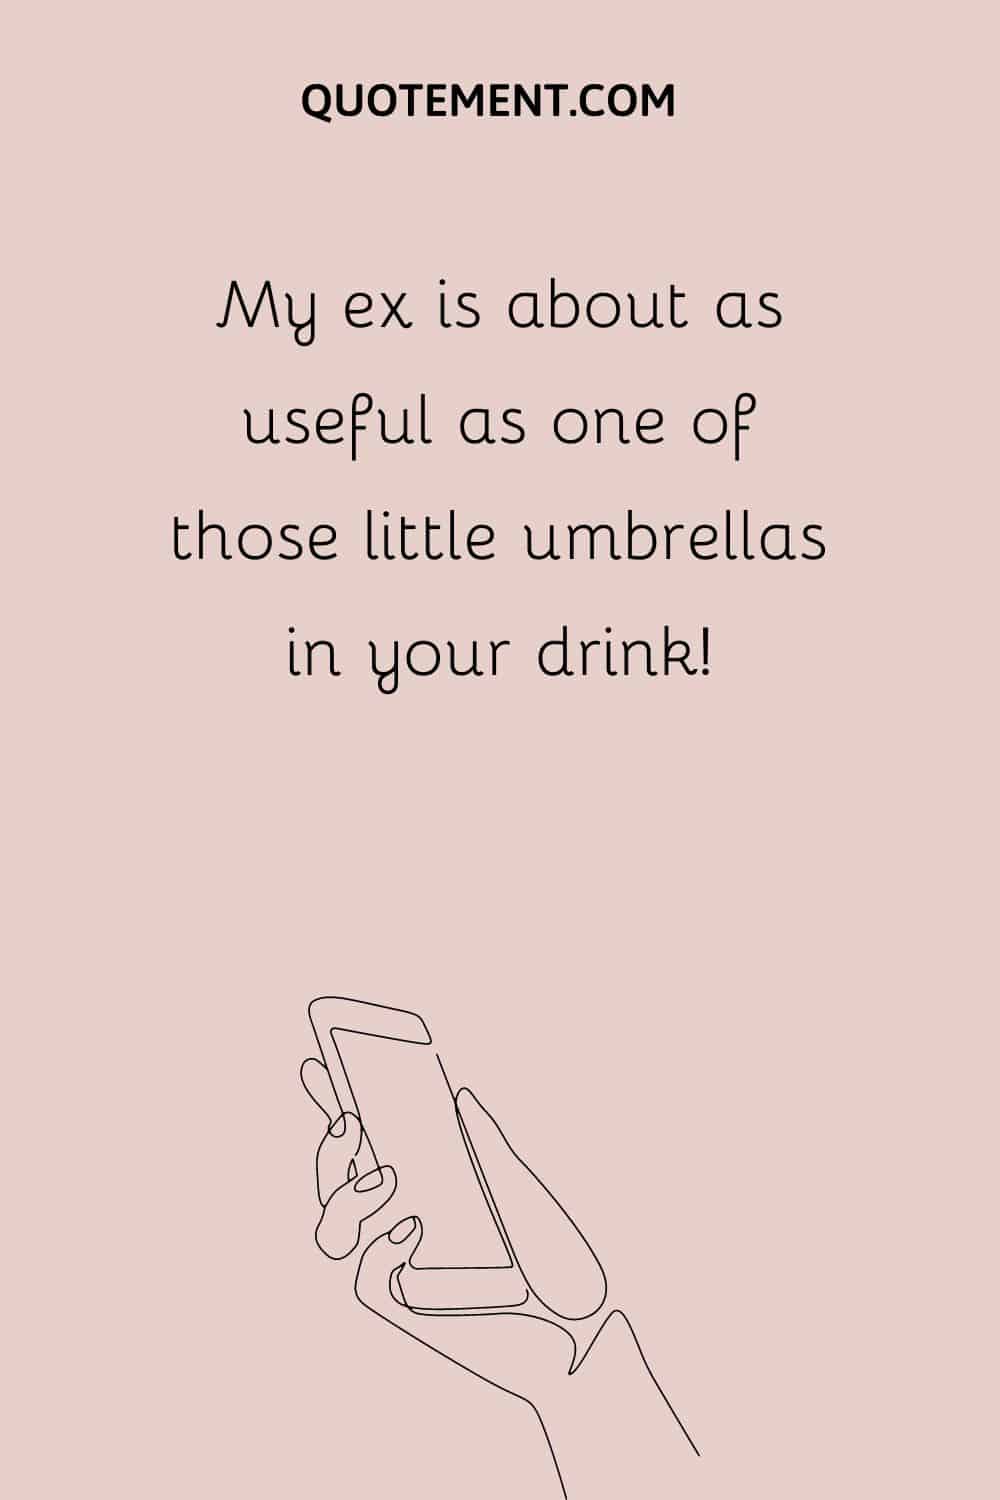 My ex is about as useful as one of those little umbrellas in your drink